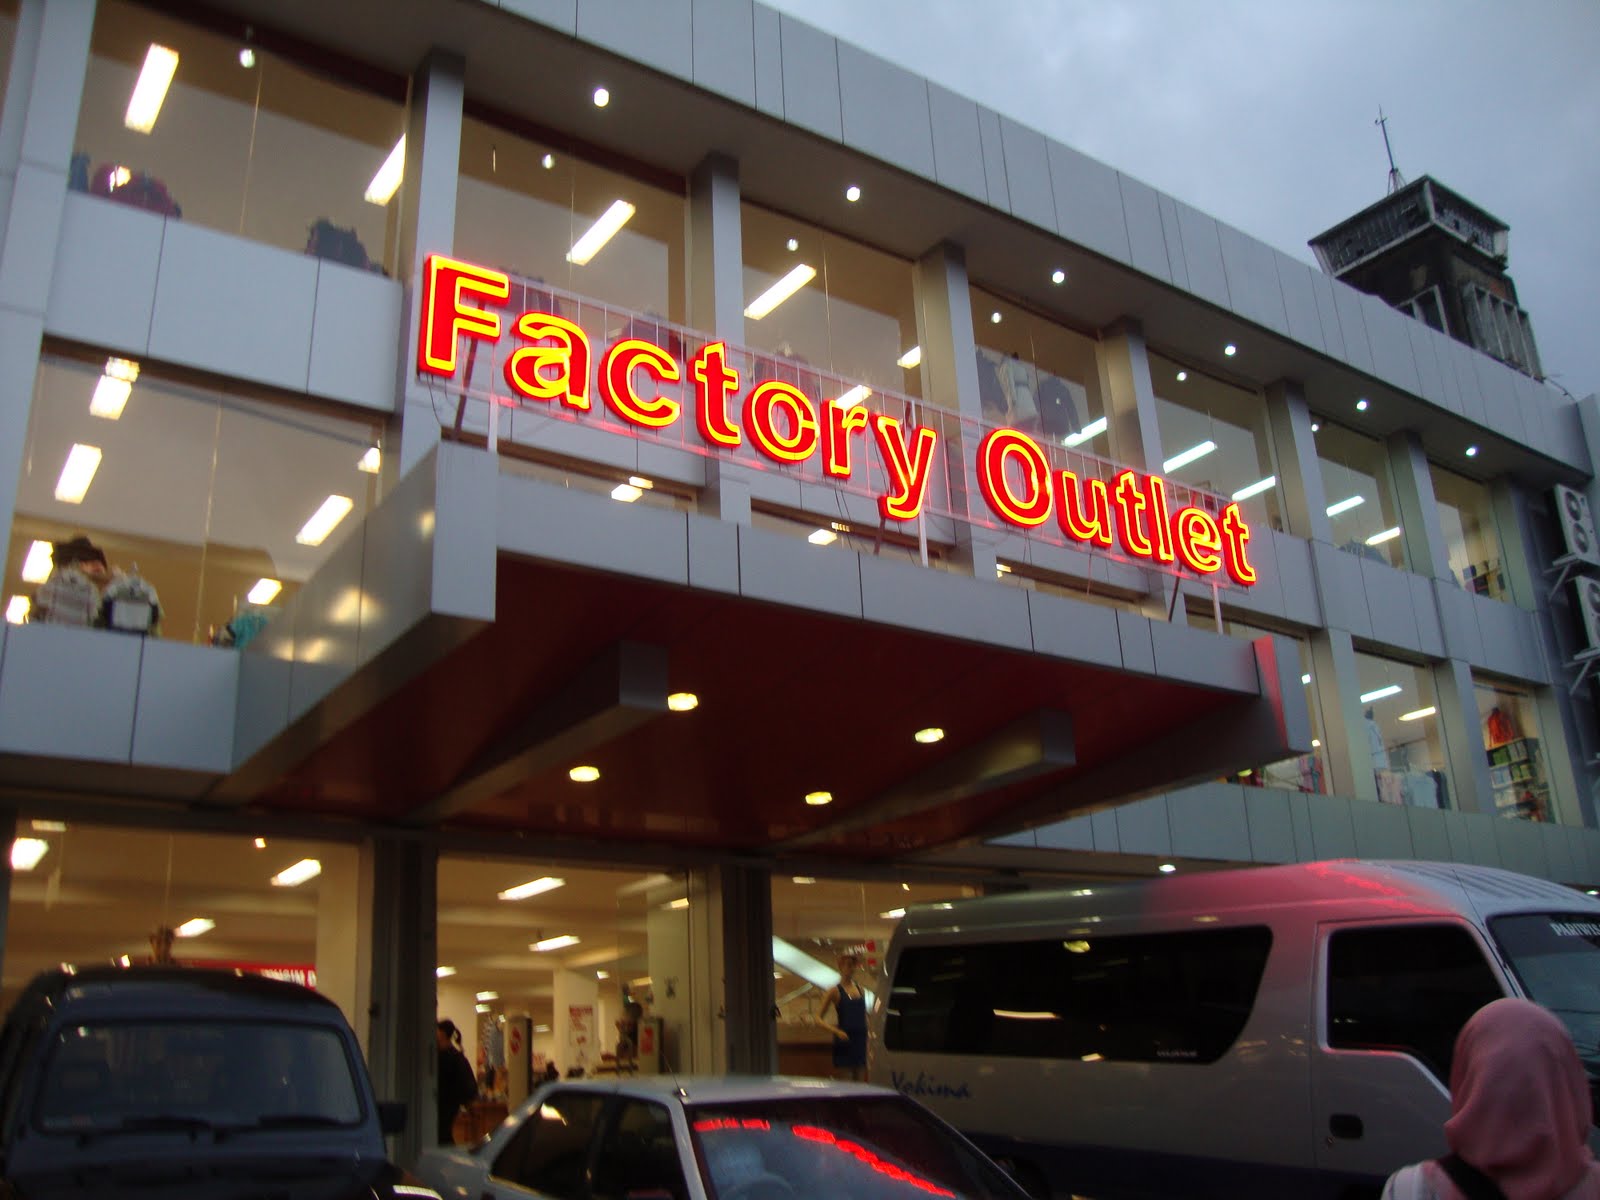 timefactory outlet